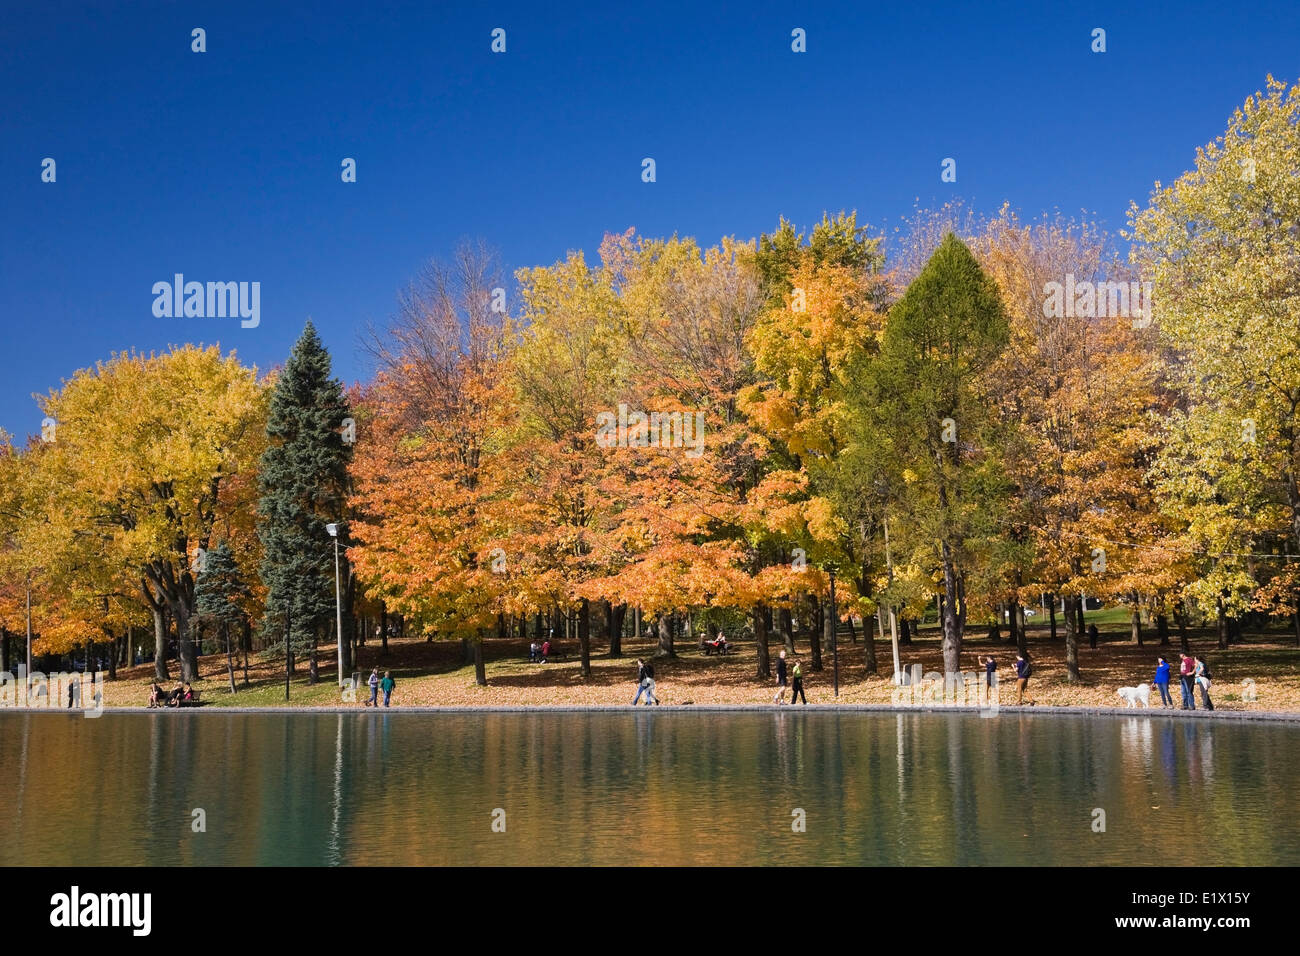 People walking around Lac des Castors (Beaver Lake) on Mount Royal Park in Autumn, Montreal, Quebec, Canada Stock Photo